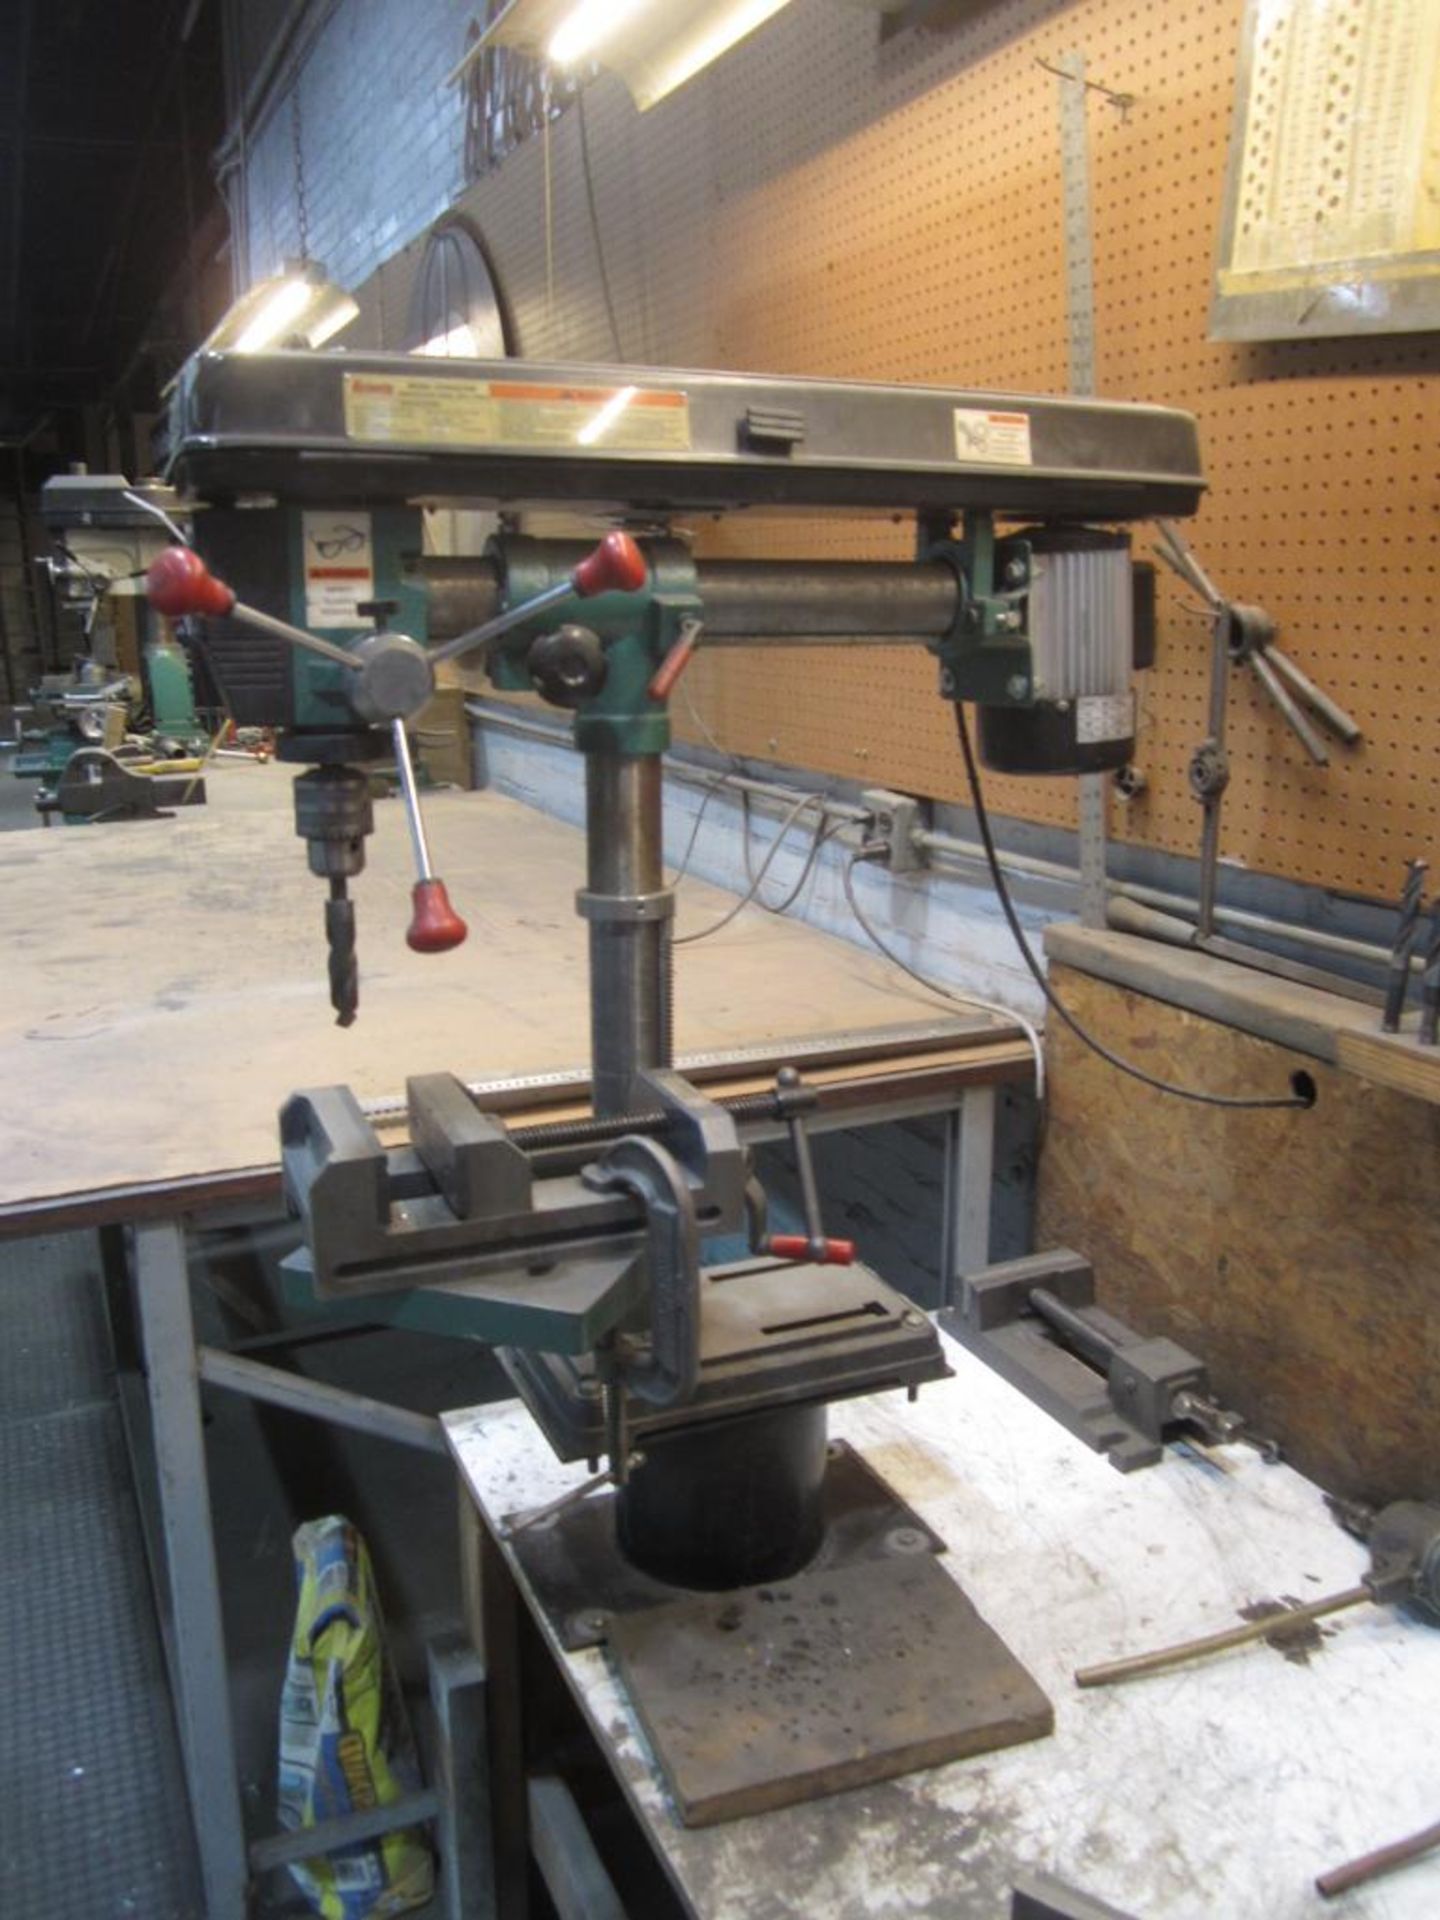 Grizzly work bench radial drill press - Image 5 of 5